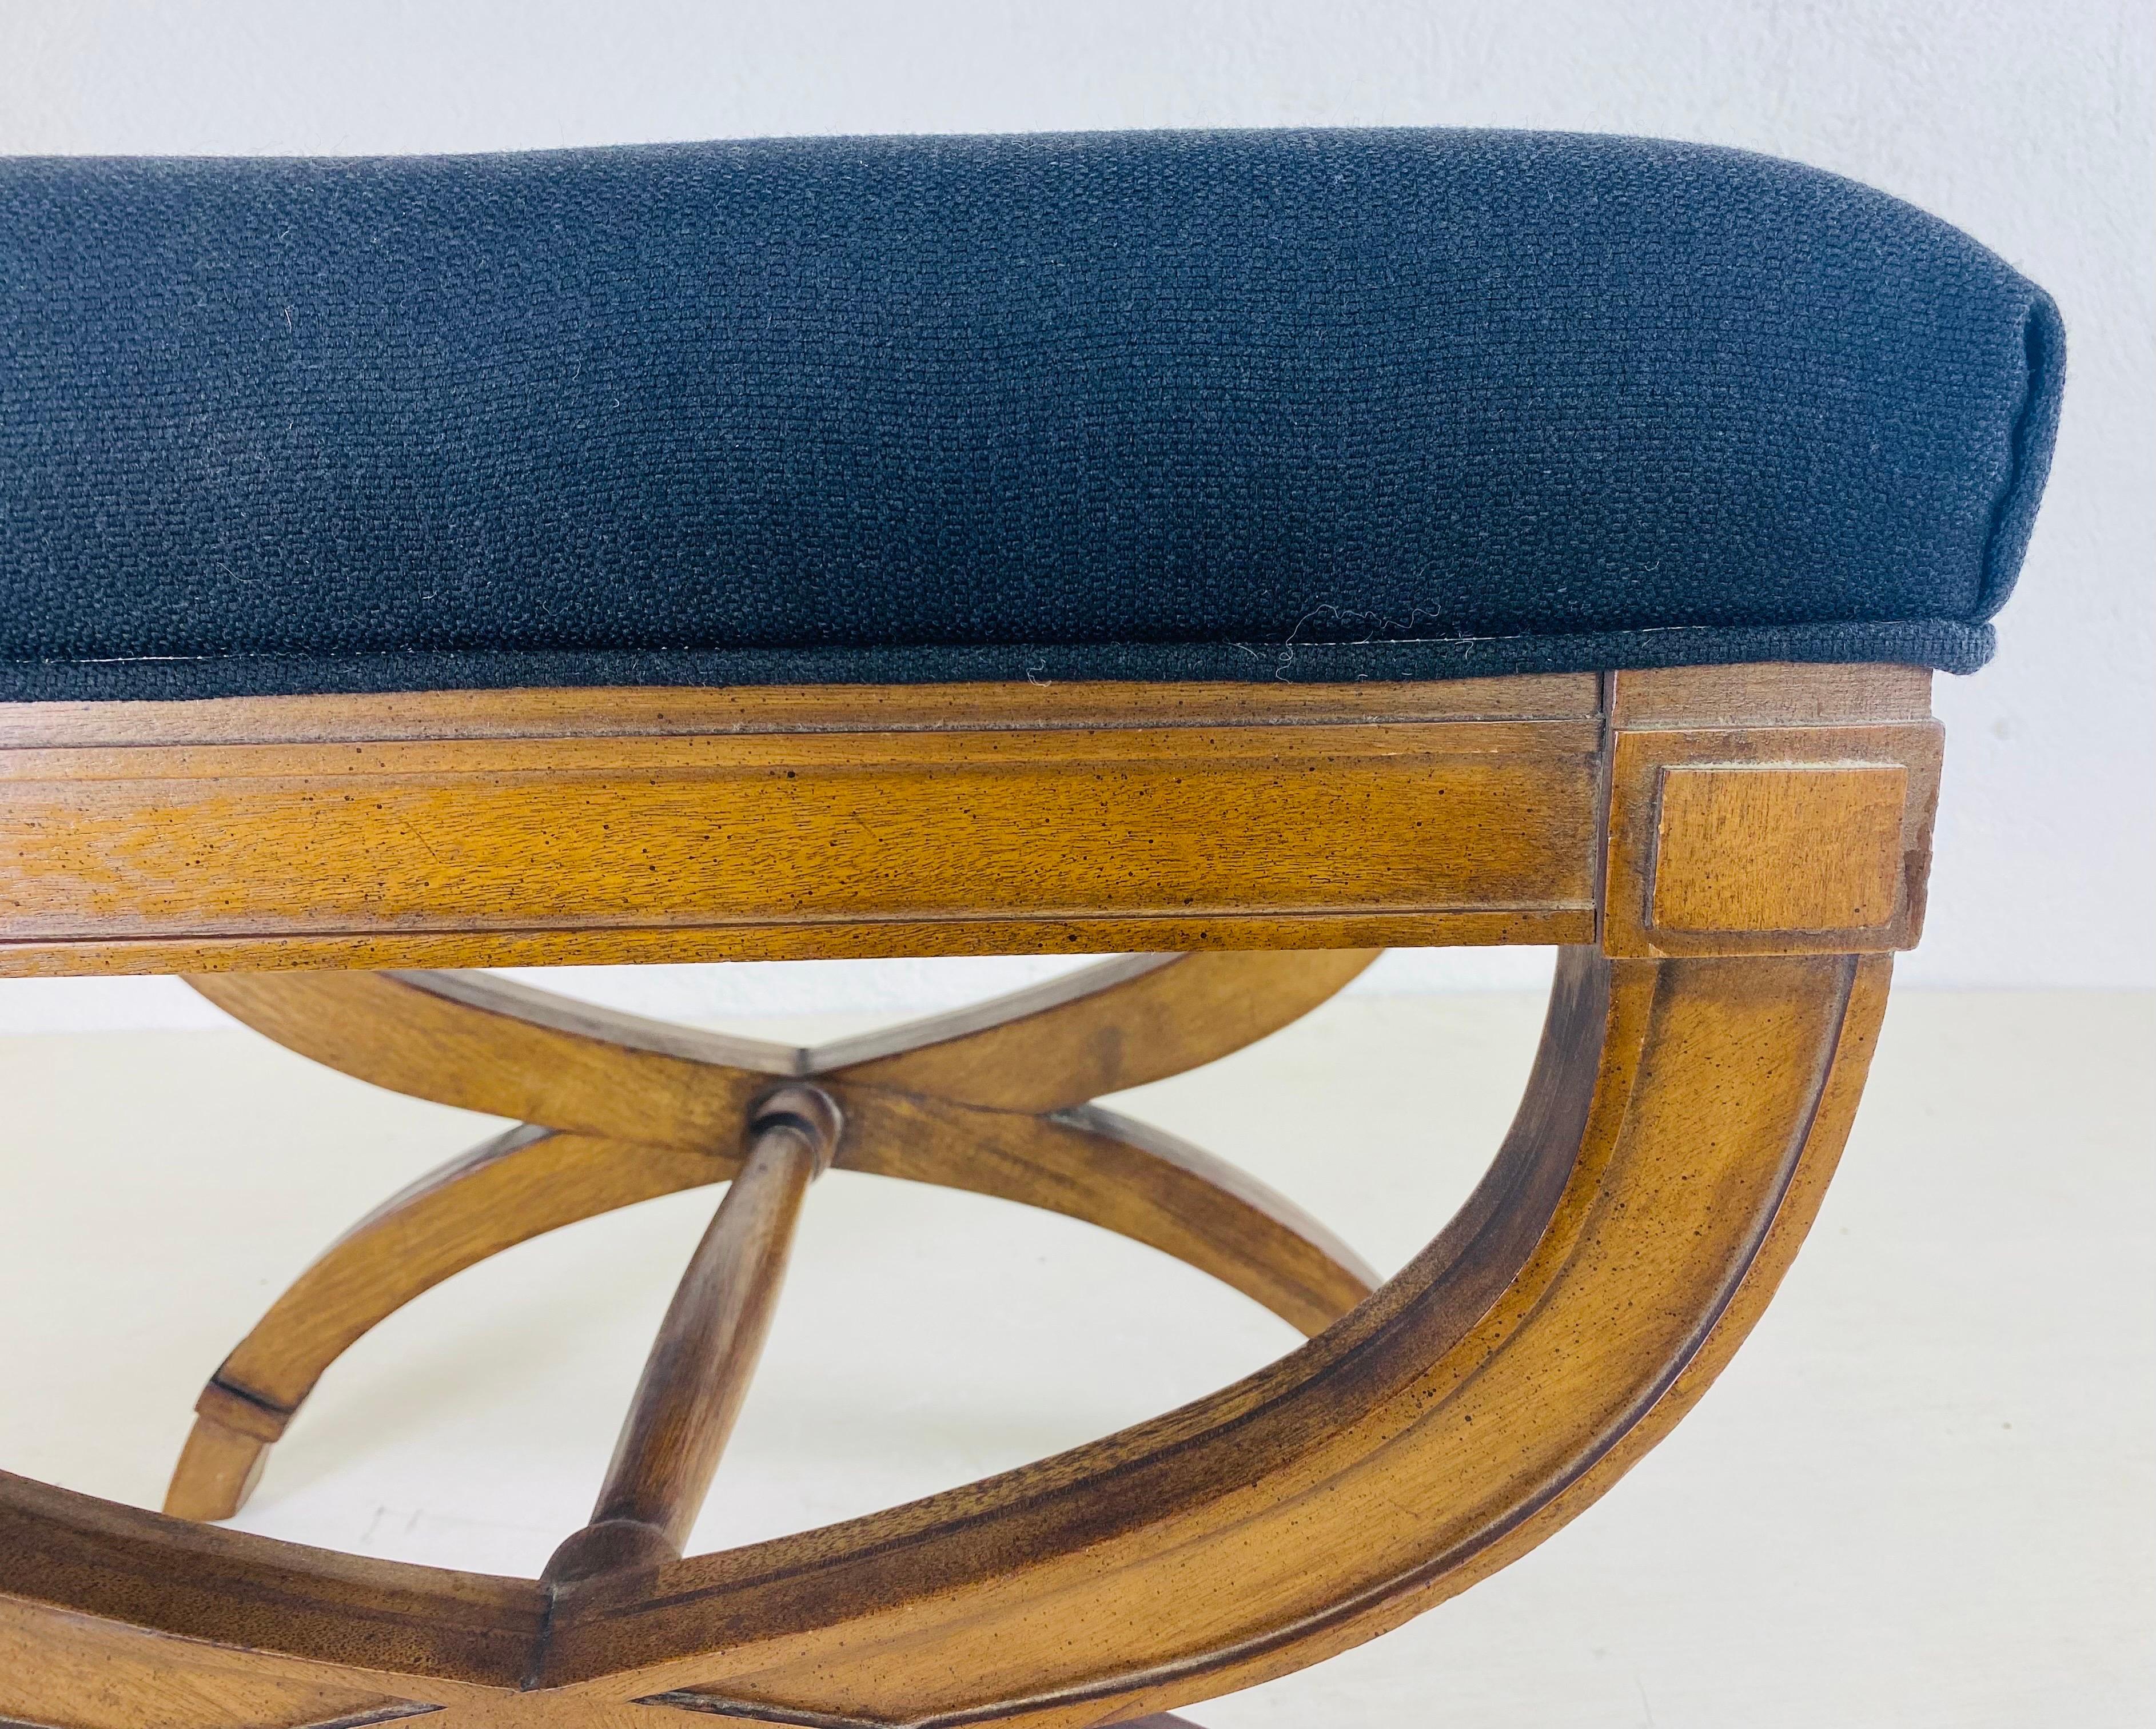 This is a mid century vintage newly upholstered empire inspired bench. This bench has been upholstered in a black cotton with a large button in the center. The bench has a dark walnut finished the surface.